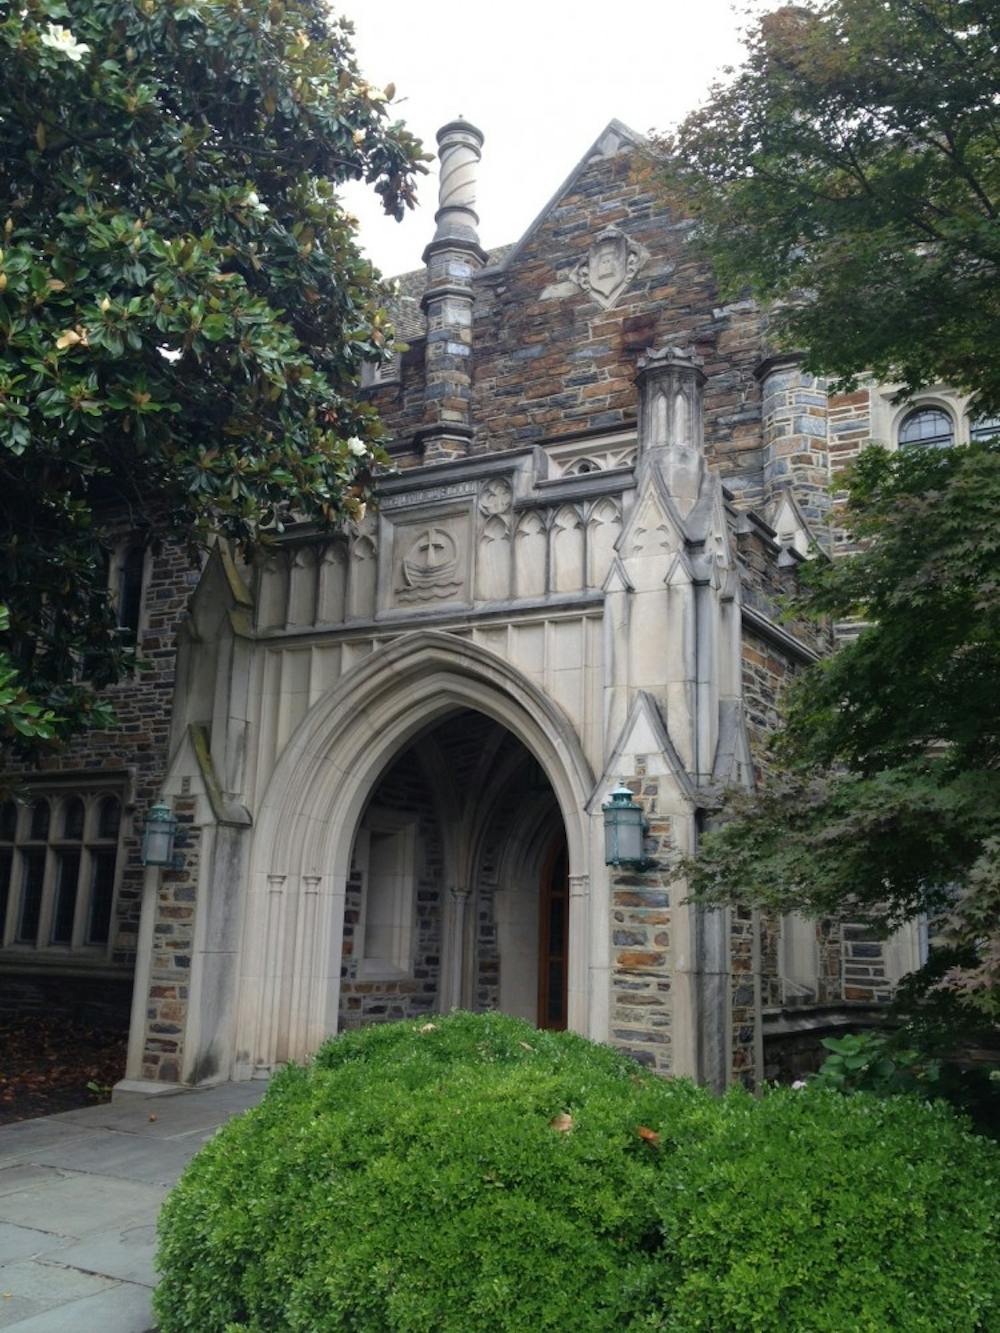 The Divinity School received $5.74 million as part of the Duke Forward campaign.